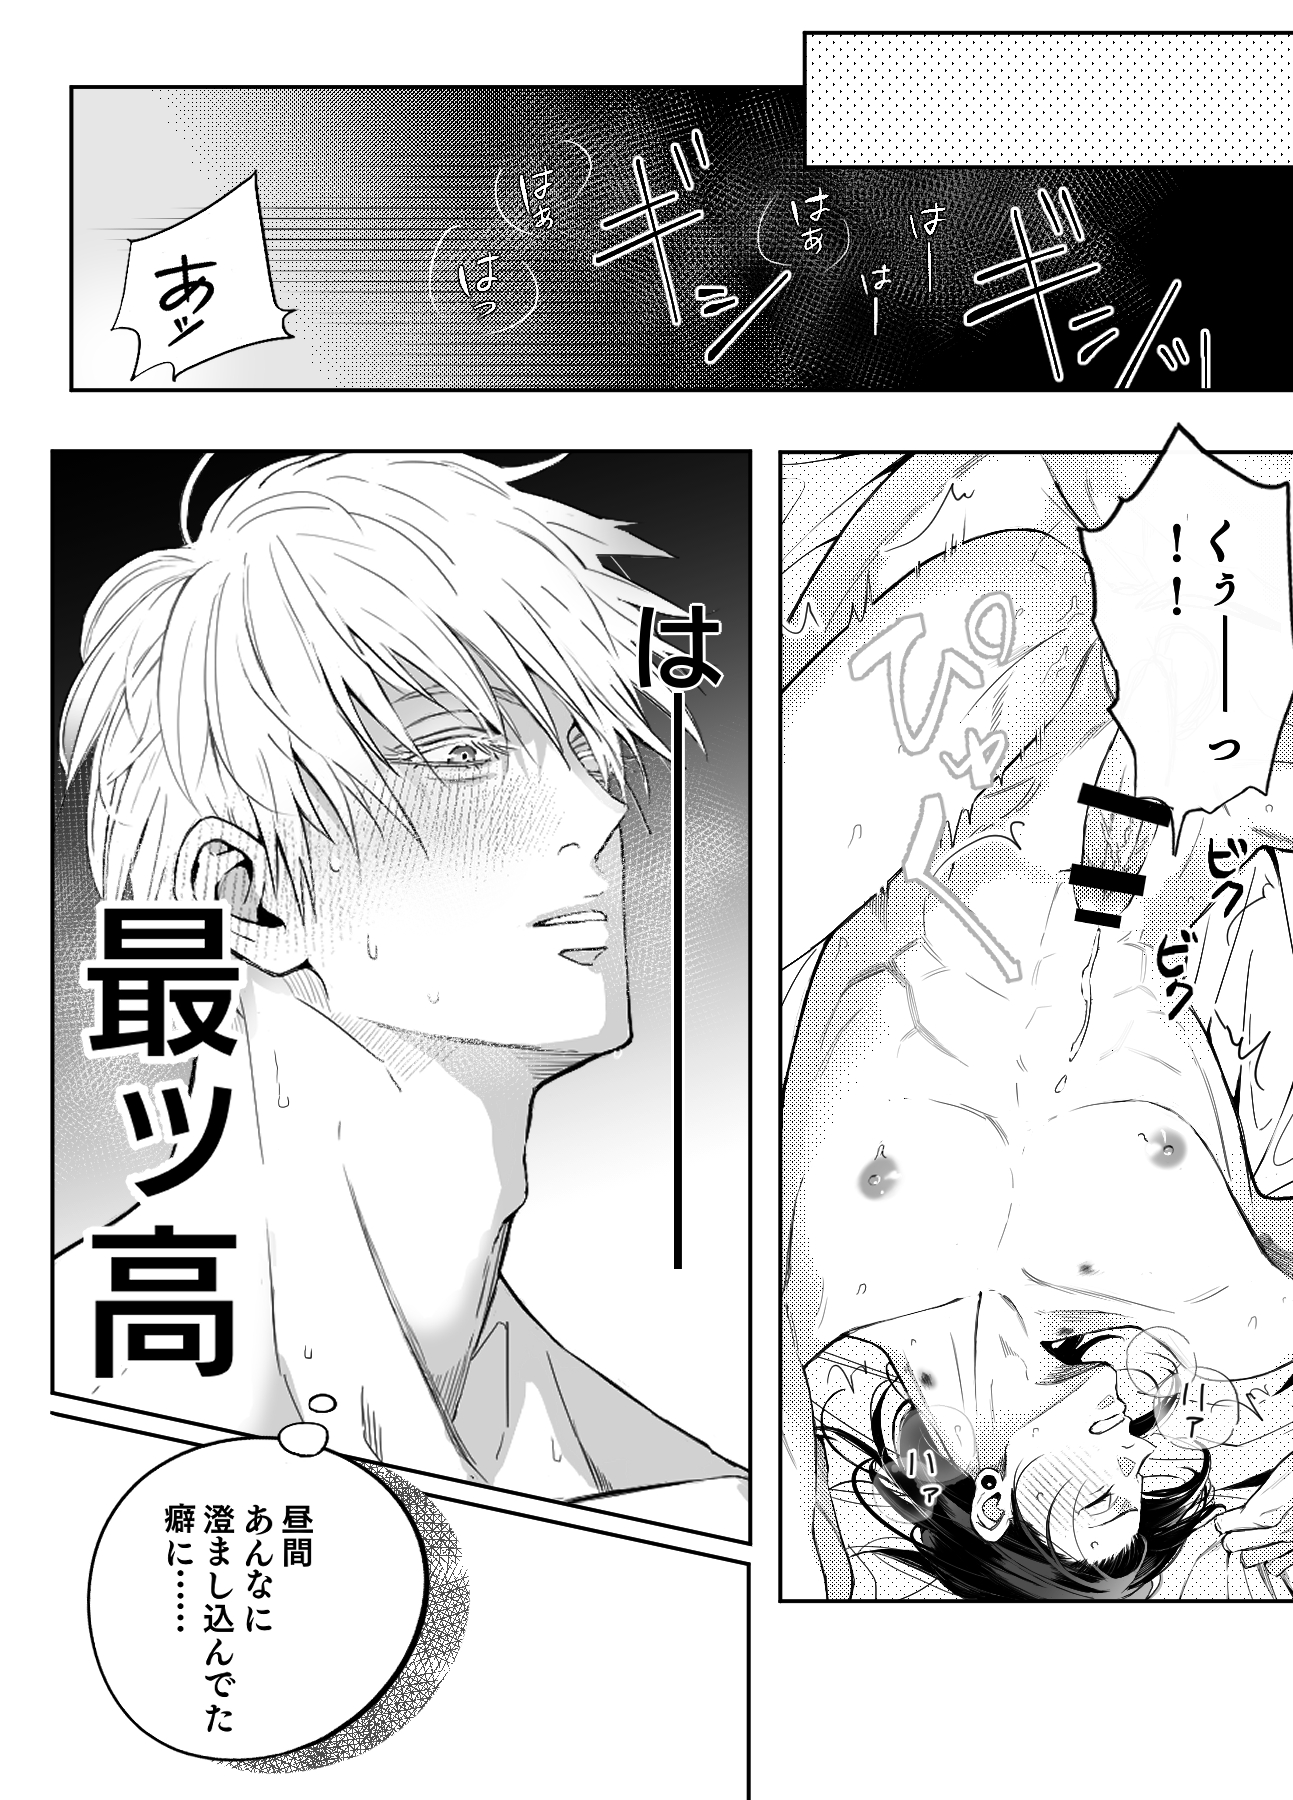 Two men and a bed: steamy scenes from bl hentai manga